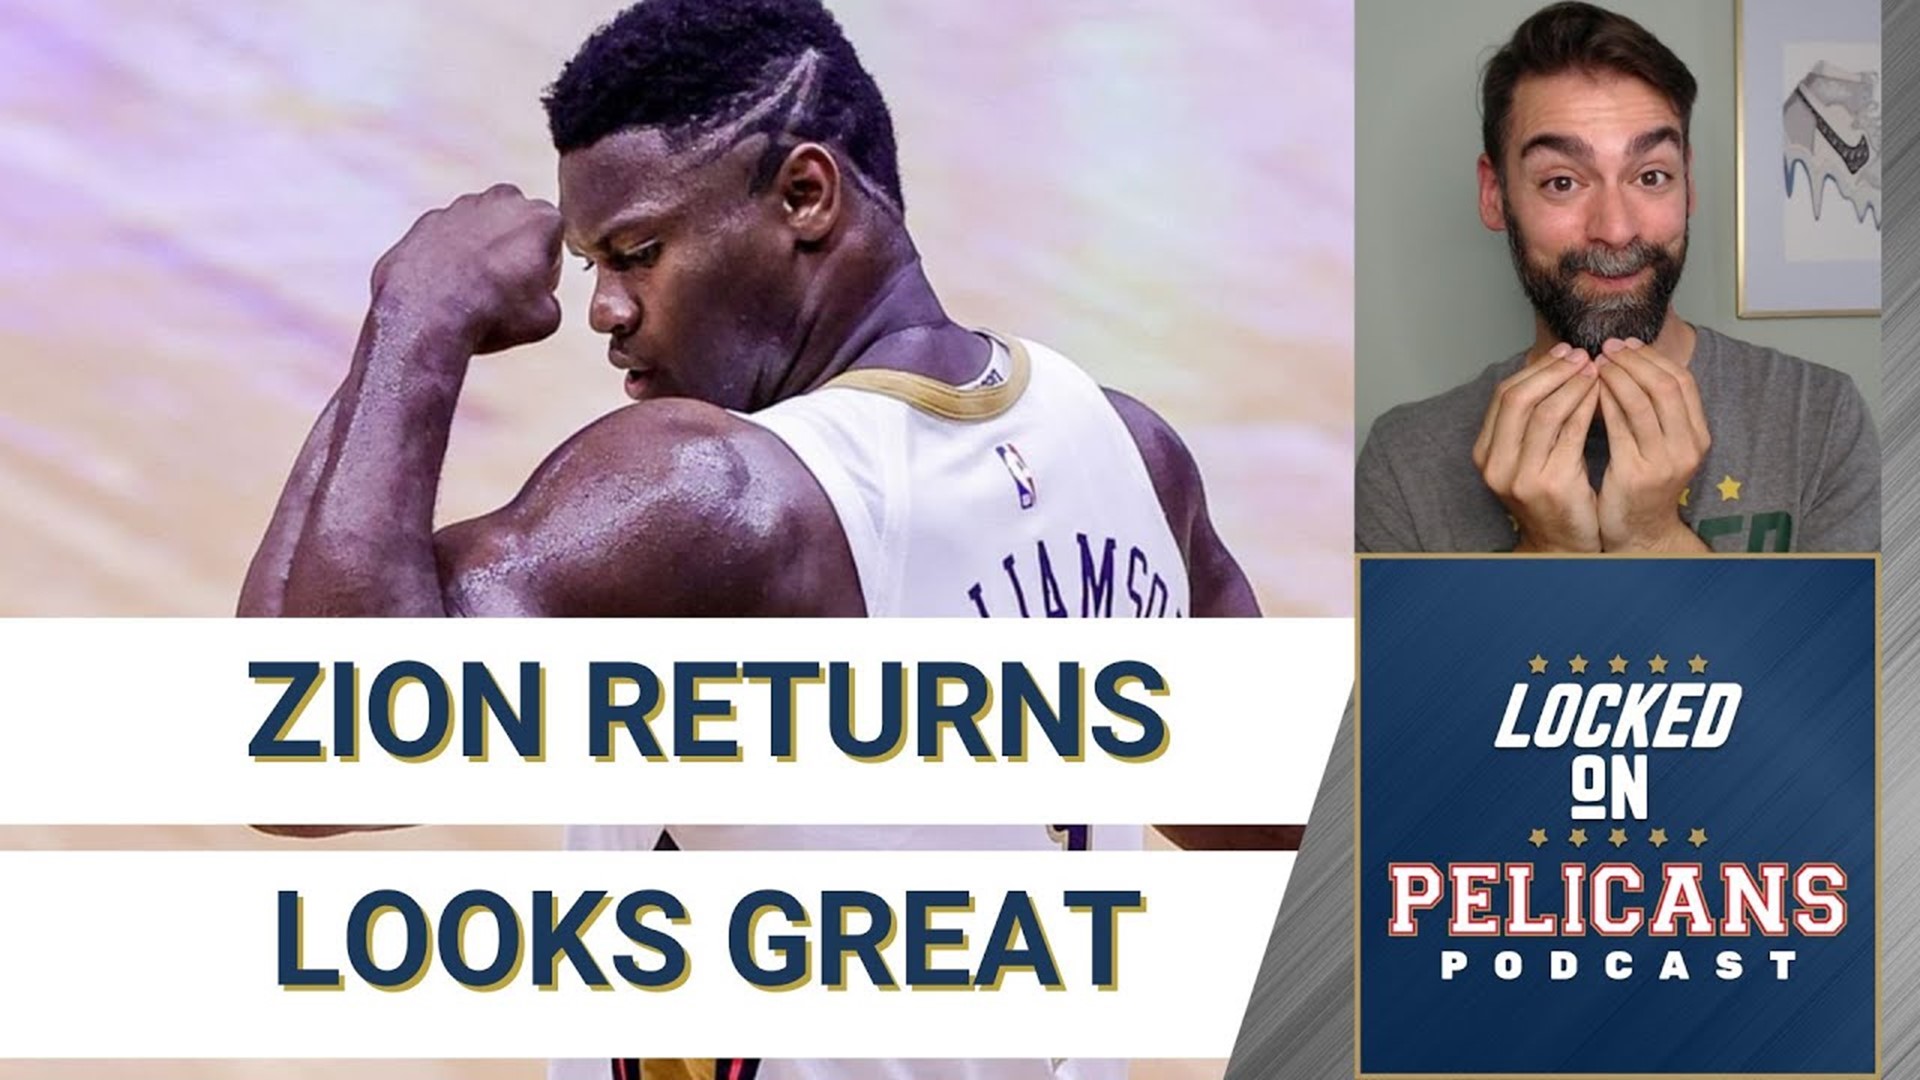 With Zion Williamson back in the lineup things fell into place for the New Orleans Pelicans in their big win over the Los Angeles Clippers and Paul George.